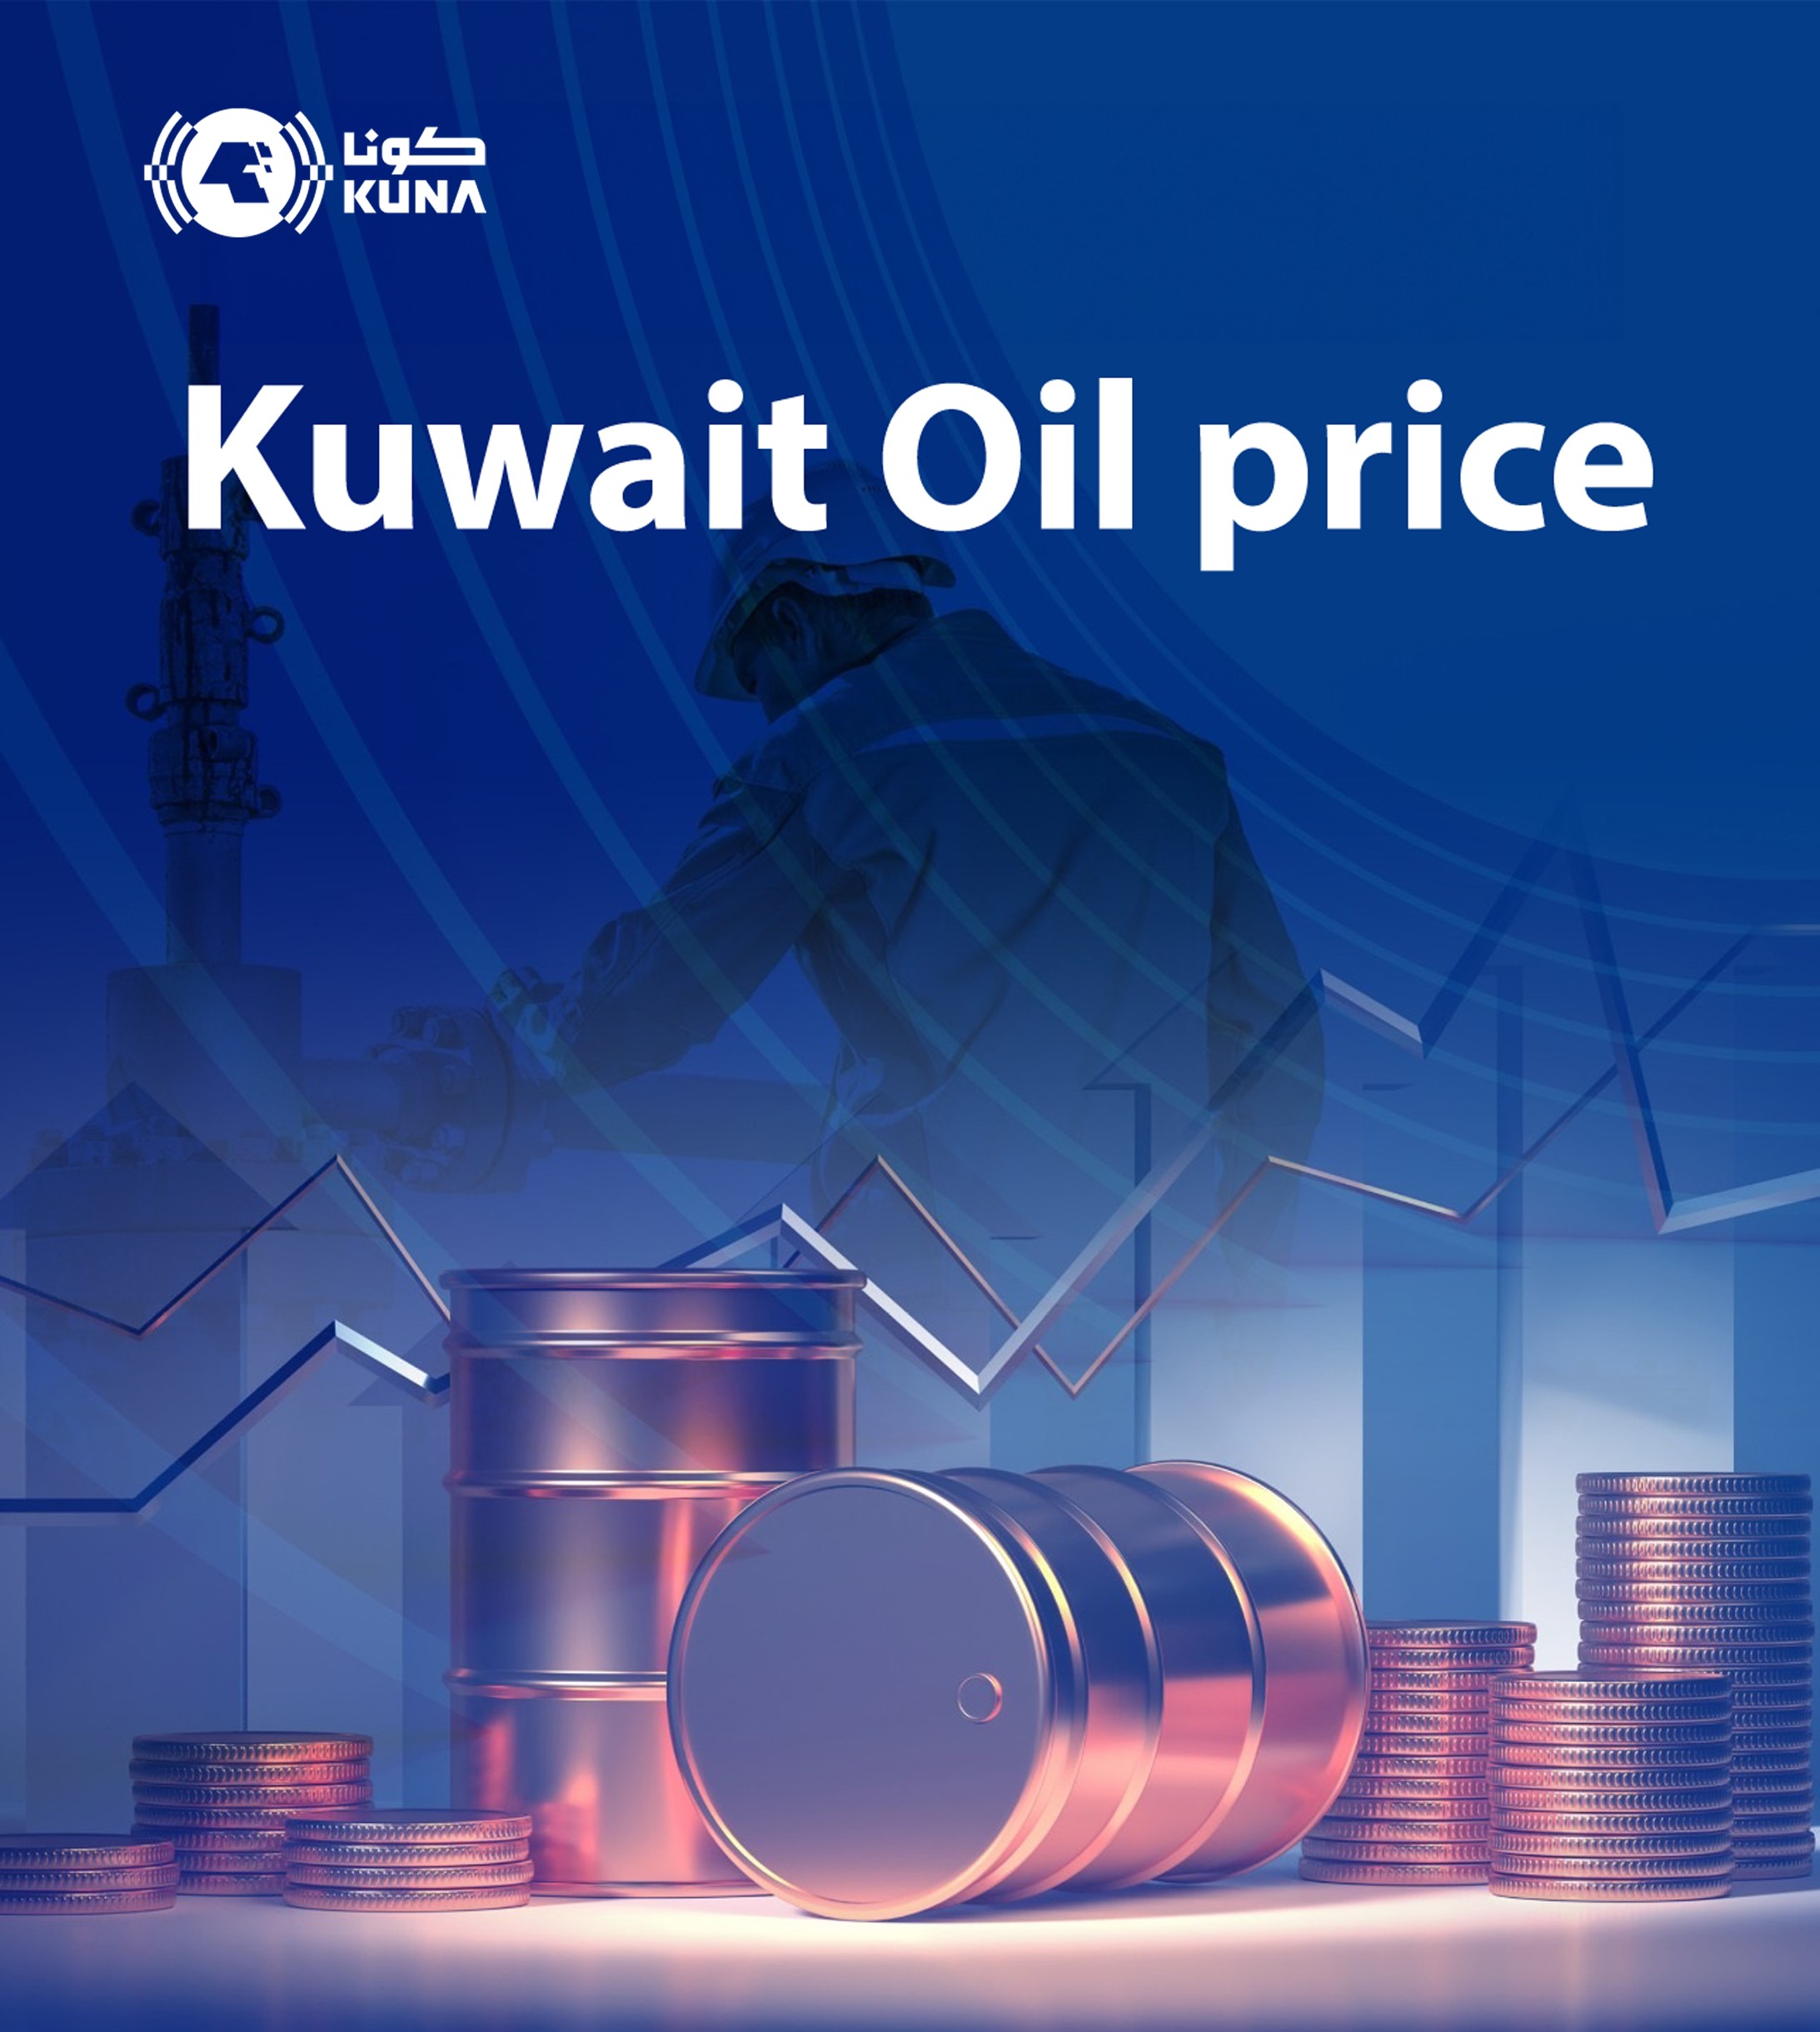 Kuwait oil price moves up to 89.87 pb                                                                                                                                                                                                                     